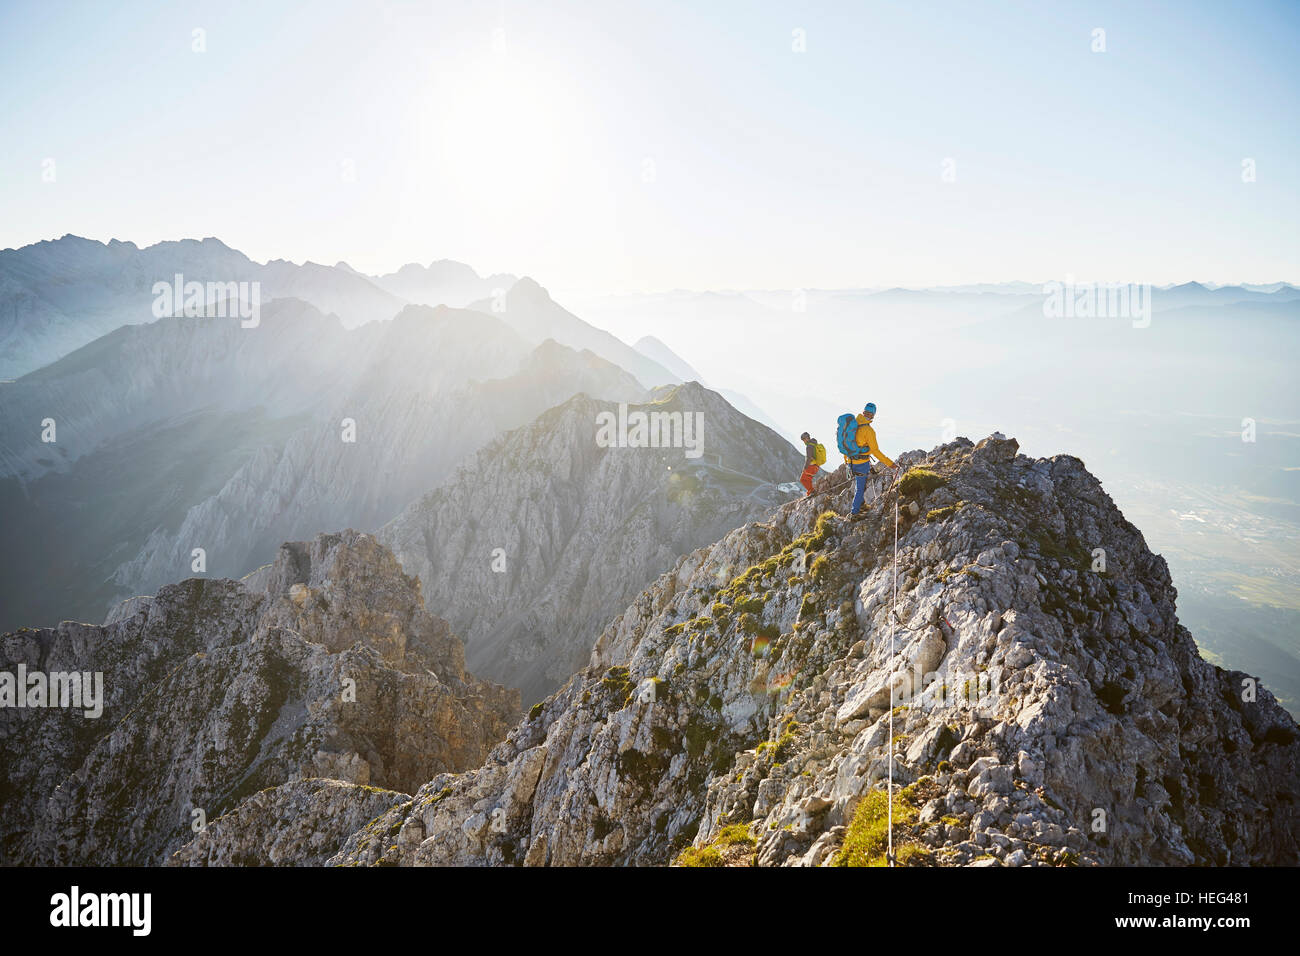 Mountain climbing, two climbers secured to steel cable, Inn Valley, Inntal Chain, Tyrol, Austria Stock Photo